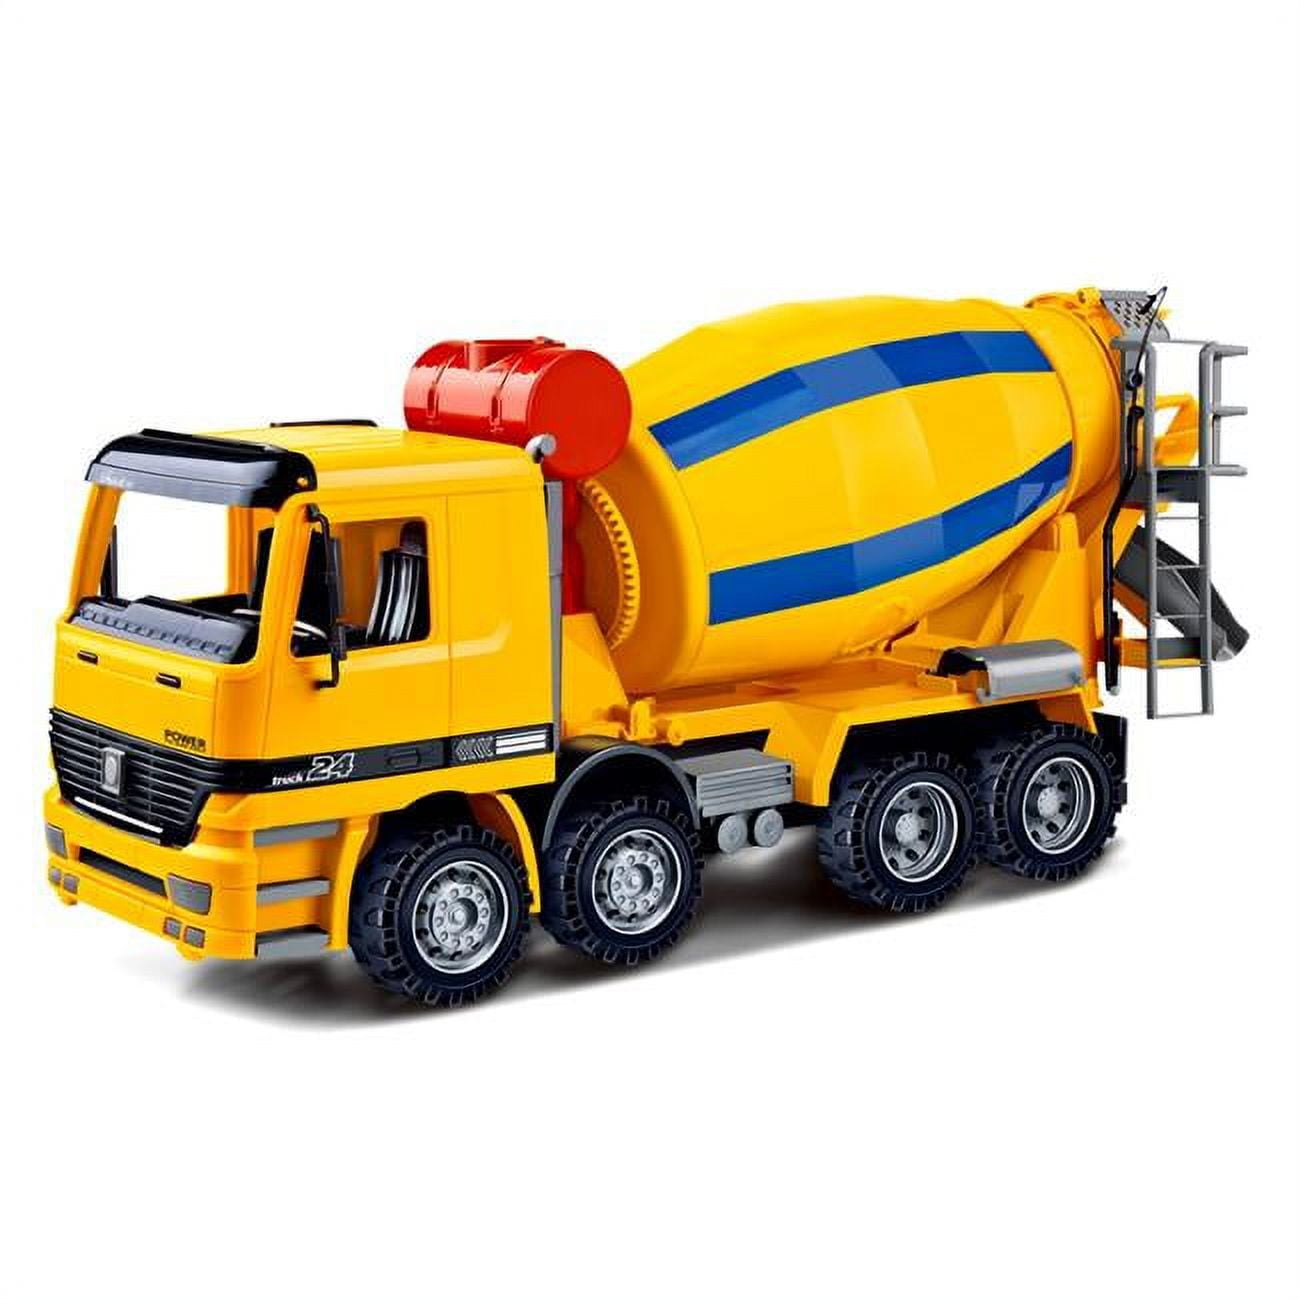 Ct981 14 In. Cement Mixer Construction Vehicle Powered By Friction For Kids